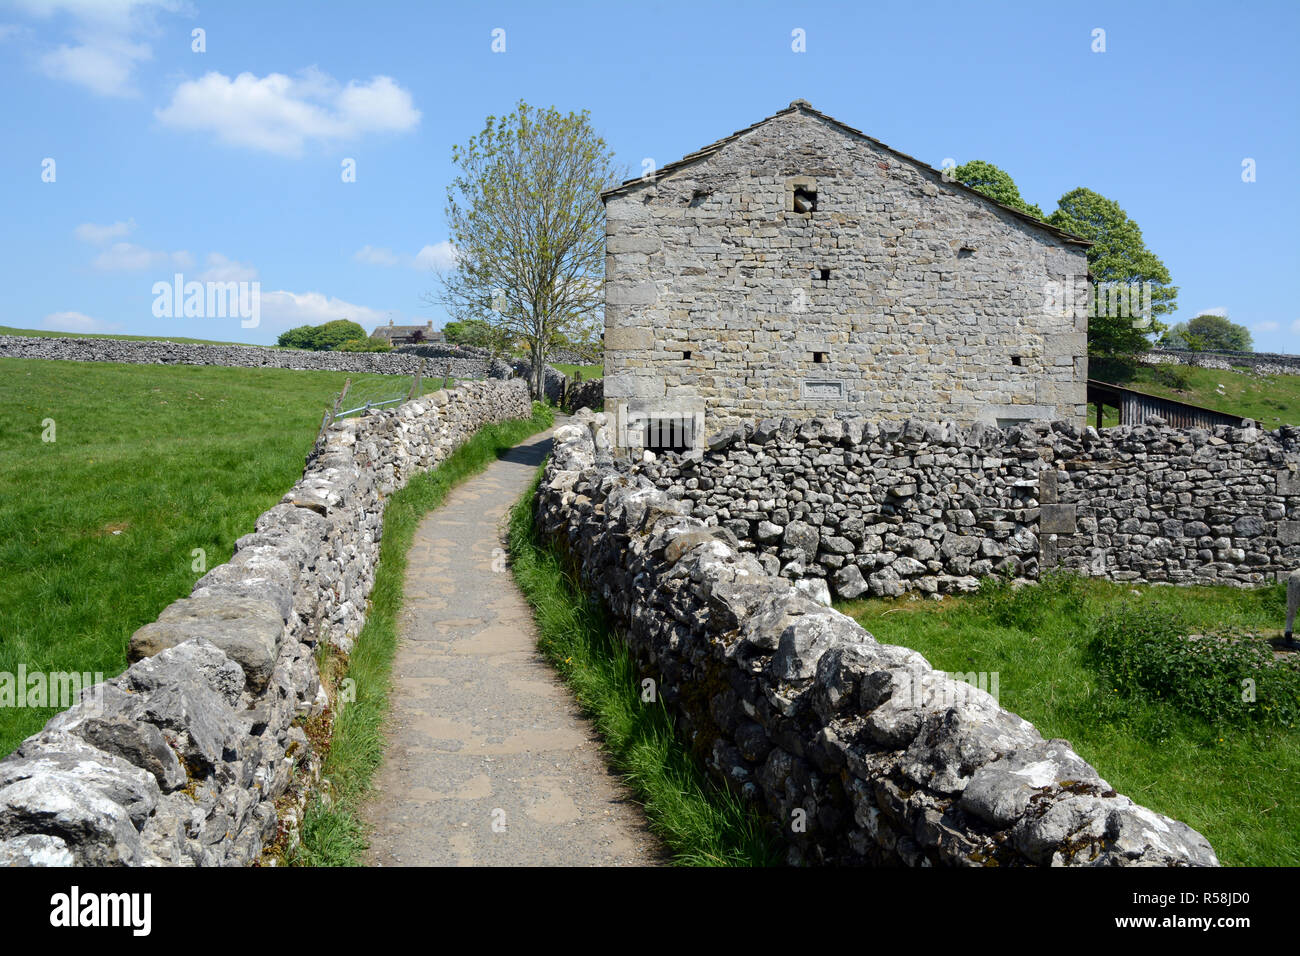 A gravel footpath running between dry stone walls and beside a cottage along The Dales Way hiking trail, in Yorkshire, England, United Kingdom. Stock Photo